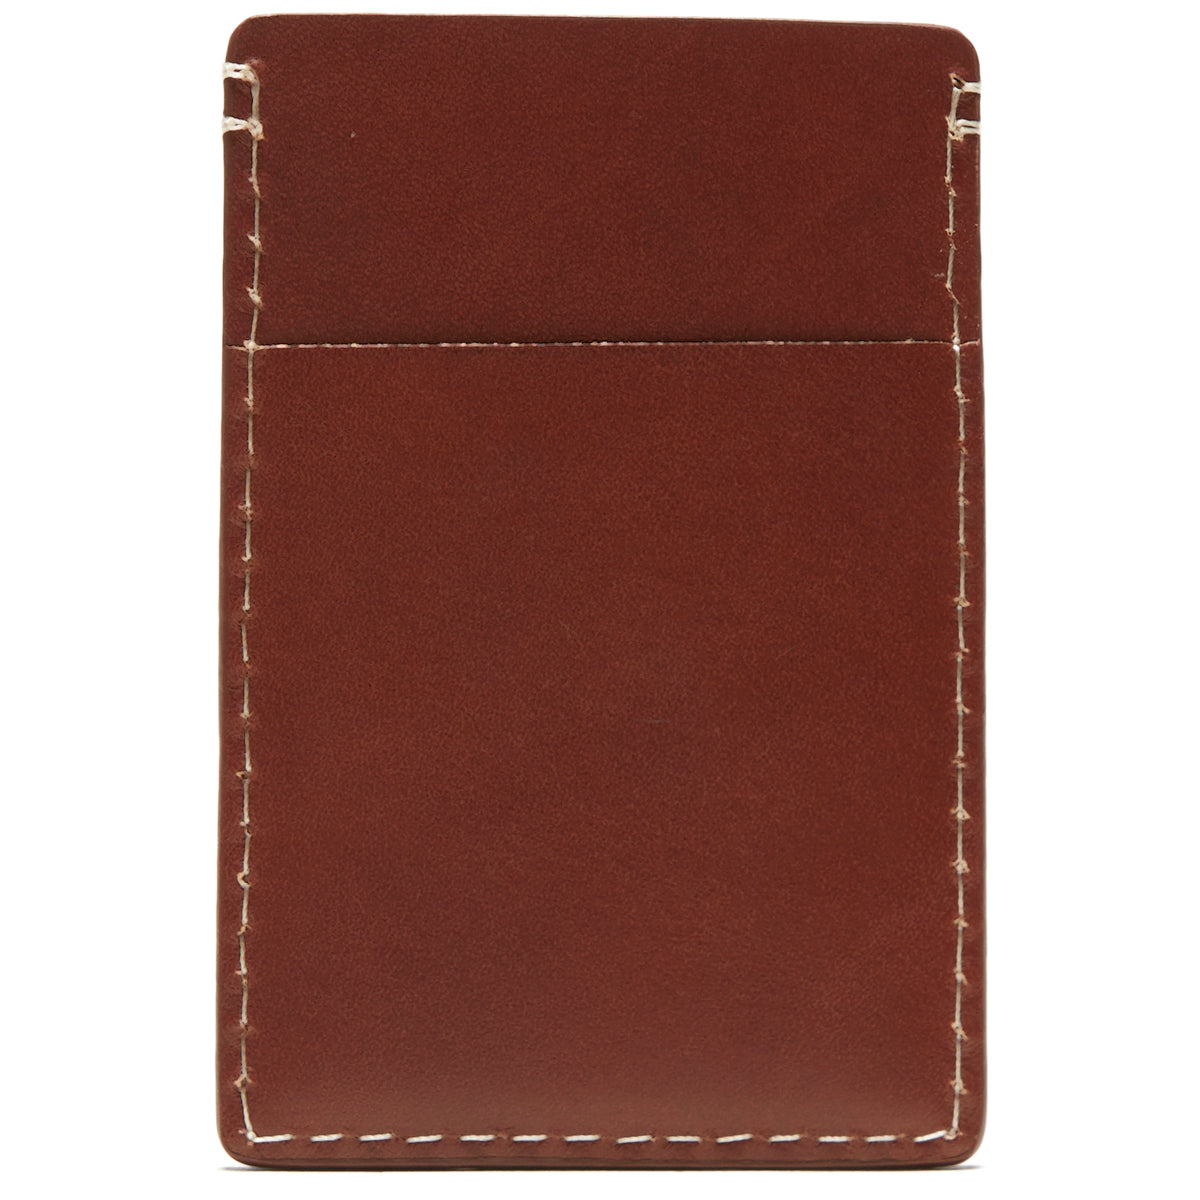 Brixton Traditional Card Holder Wallet - Brown image 2